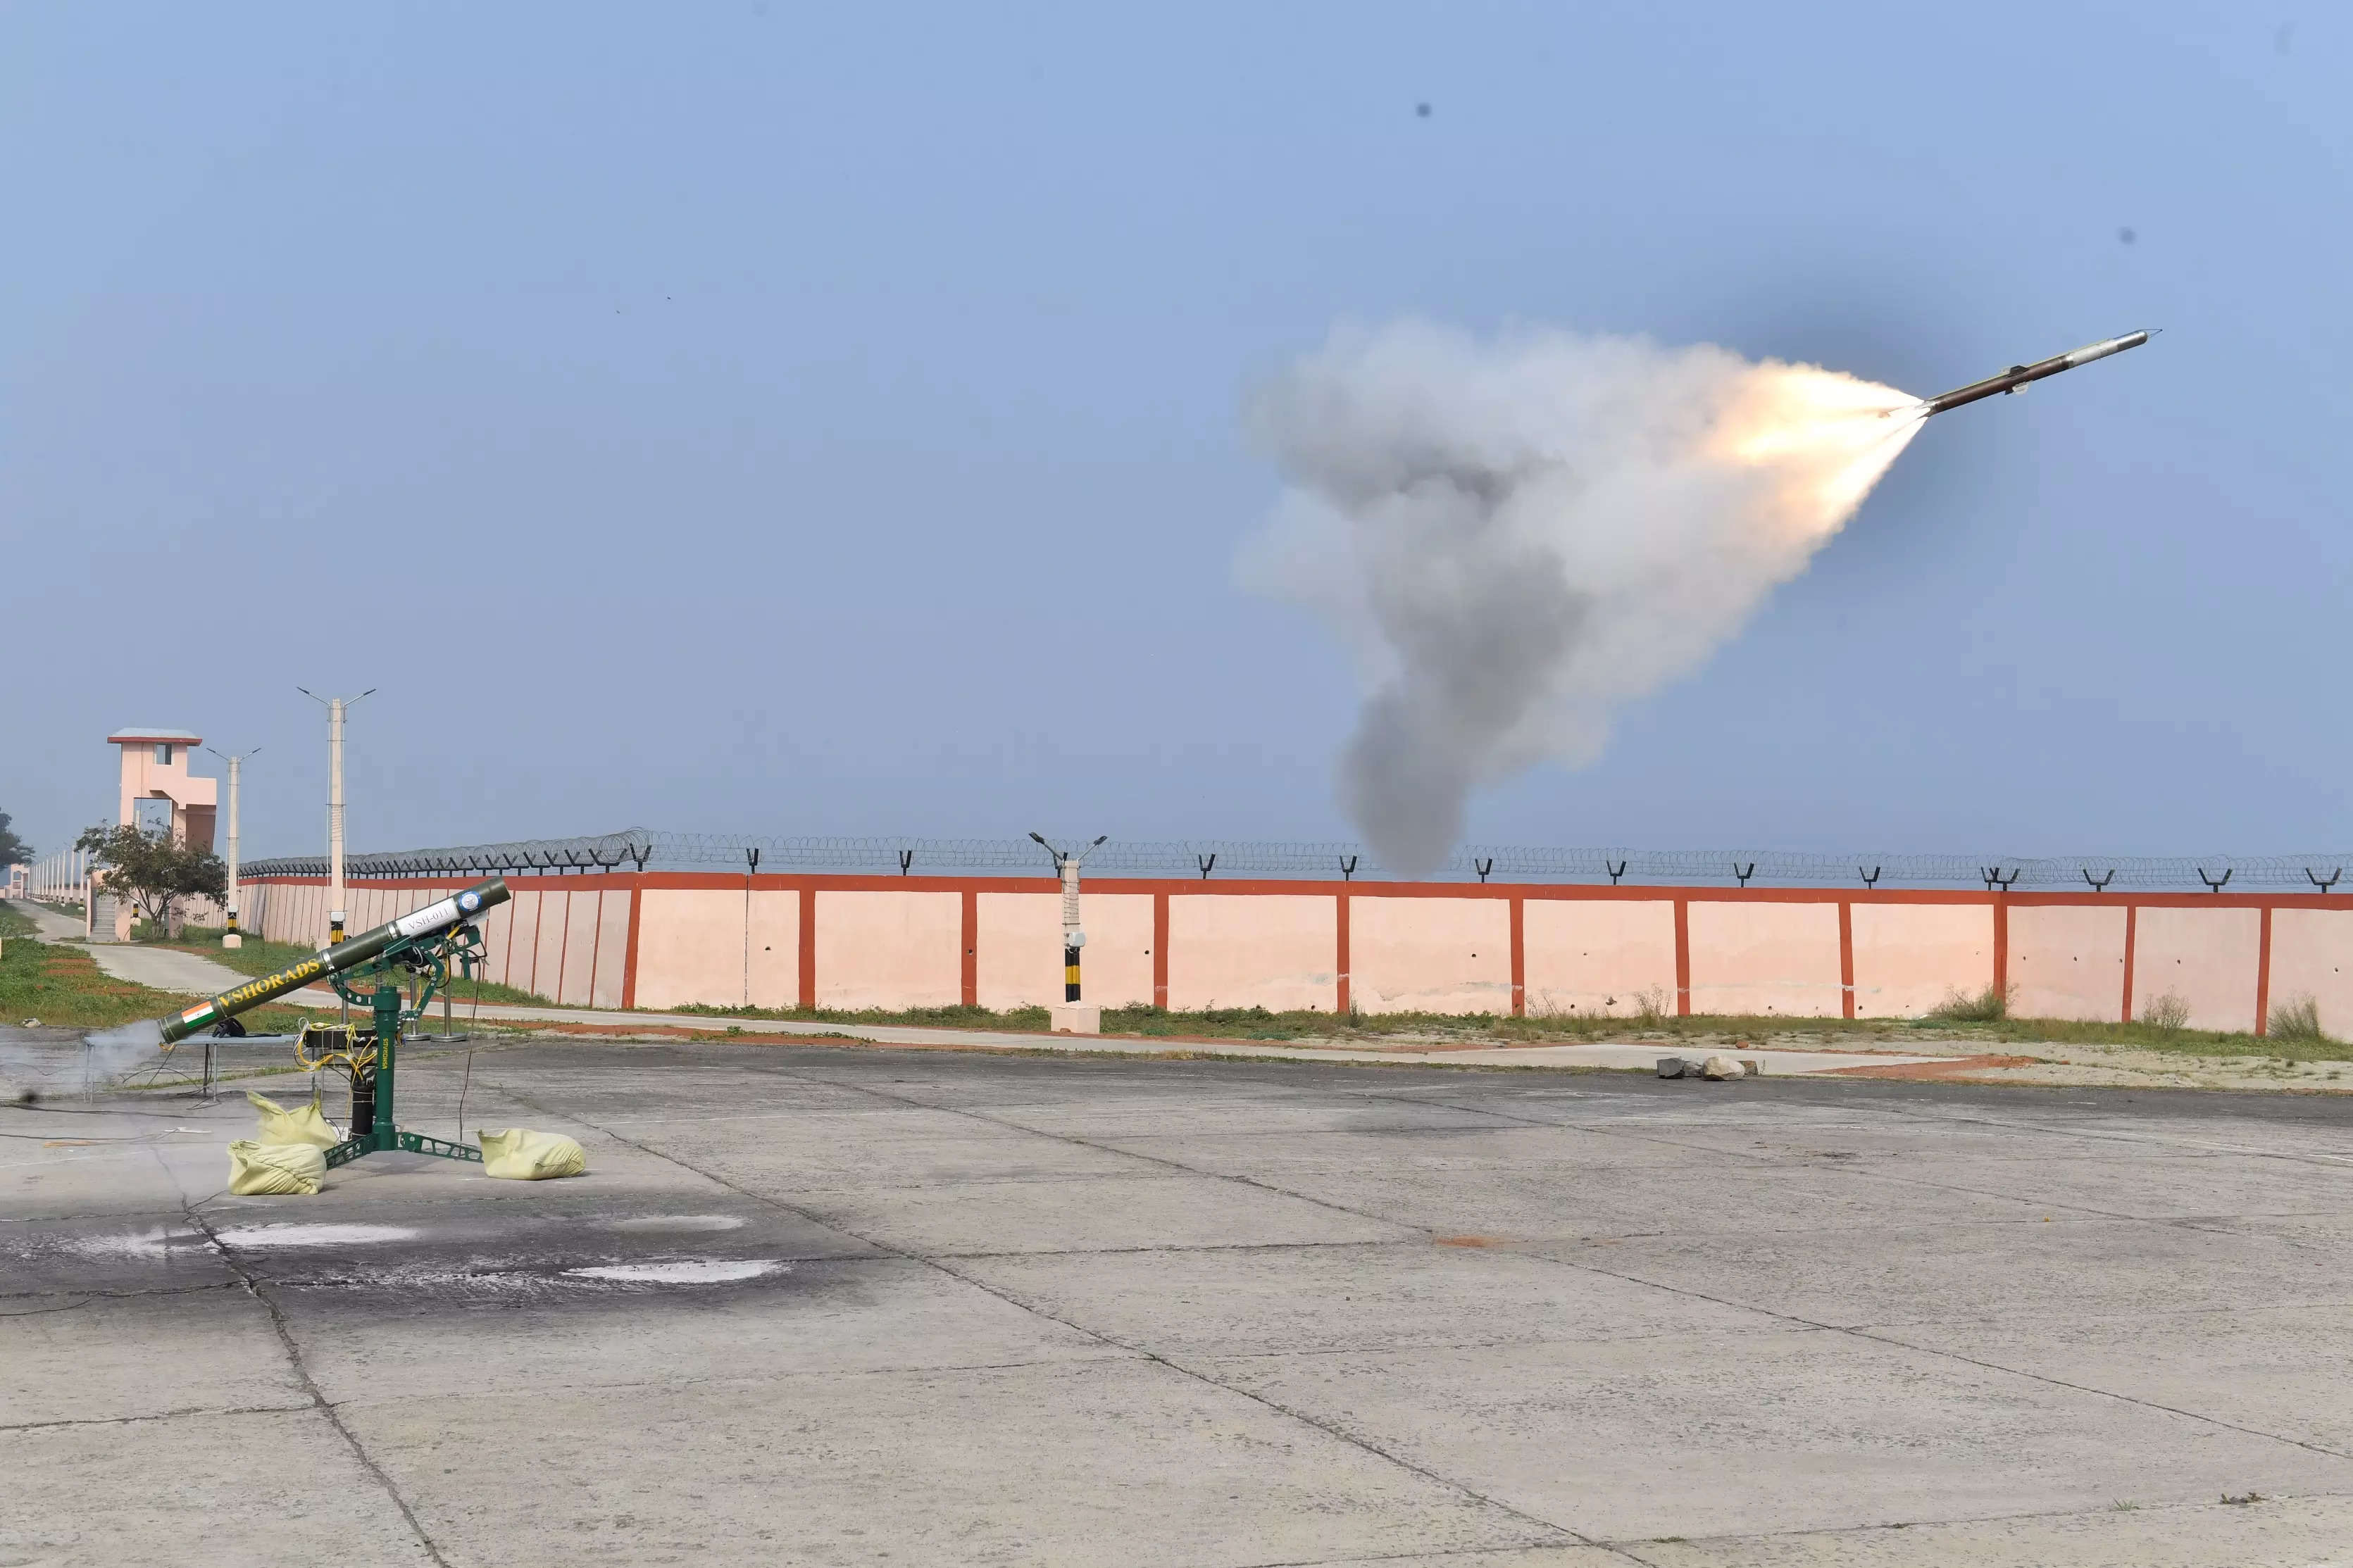 India successfully tests indigenous VSHORADS missile system, enhancing air defence capabilities | India News